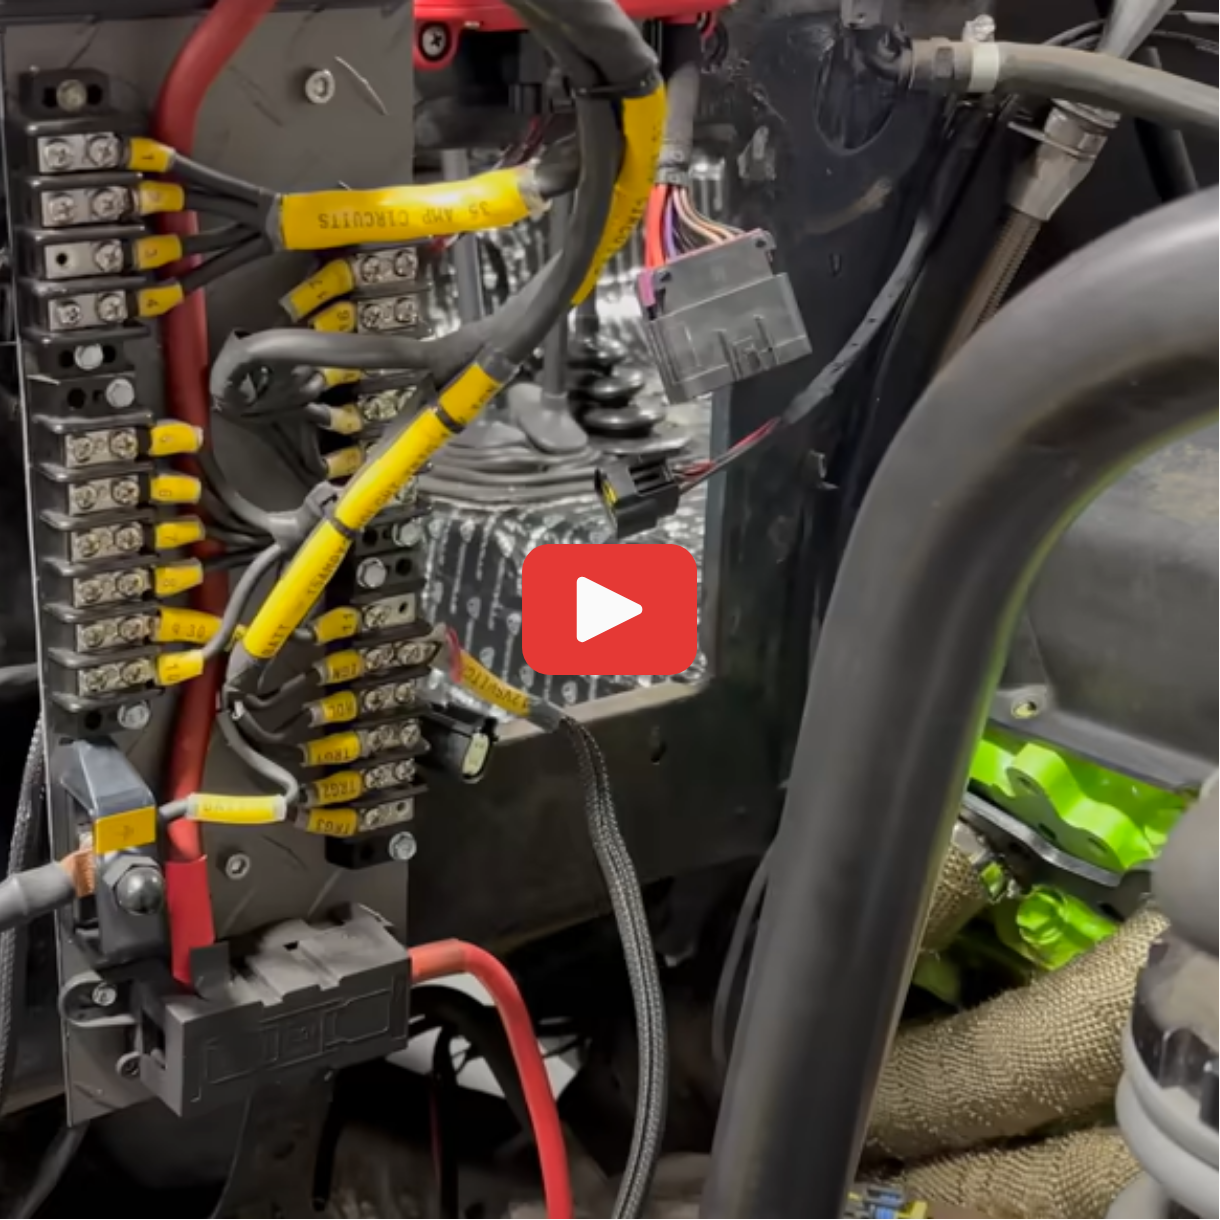 Use this hack to make your wiring projects next level!